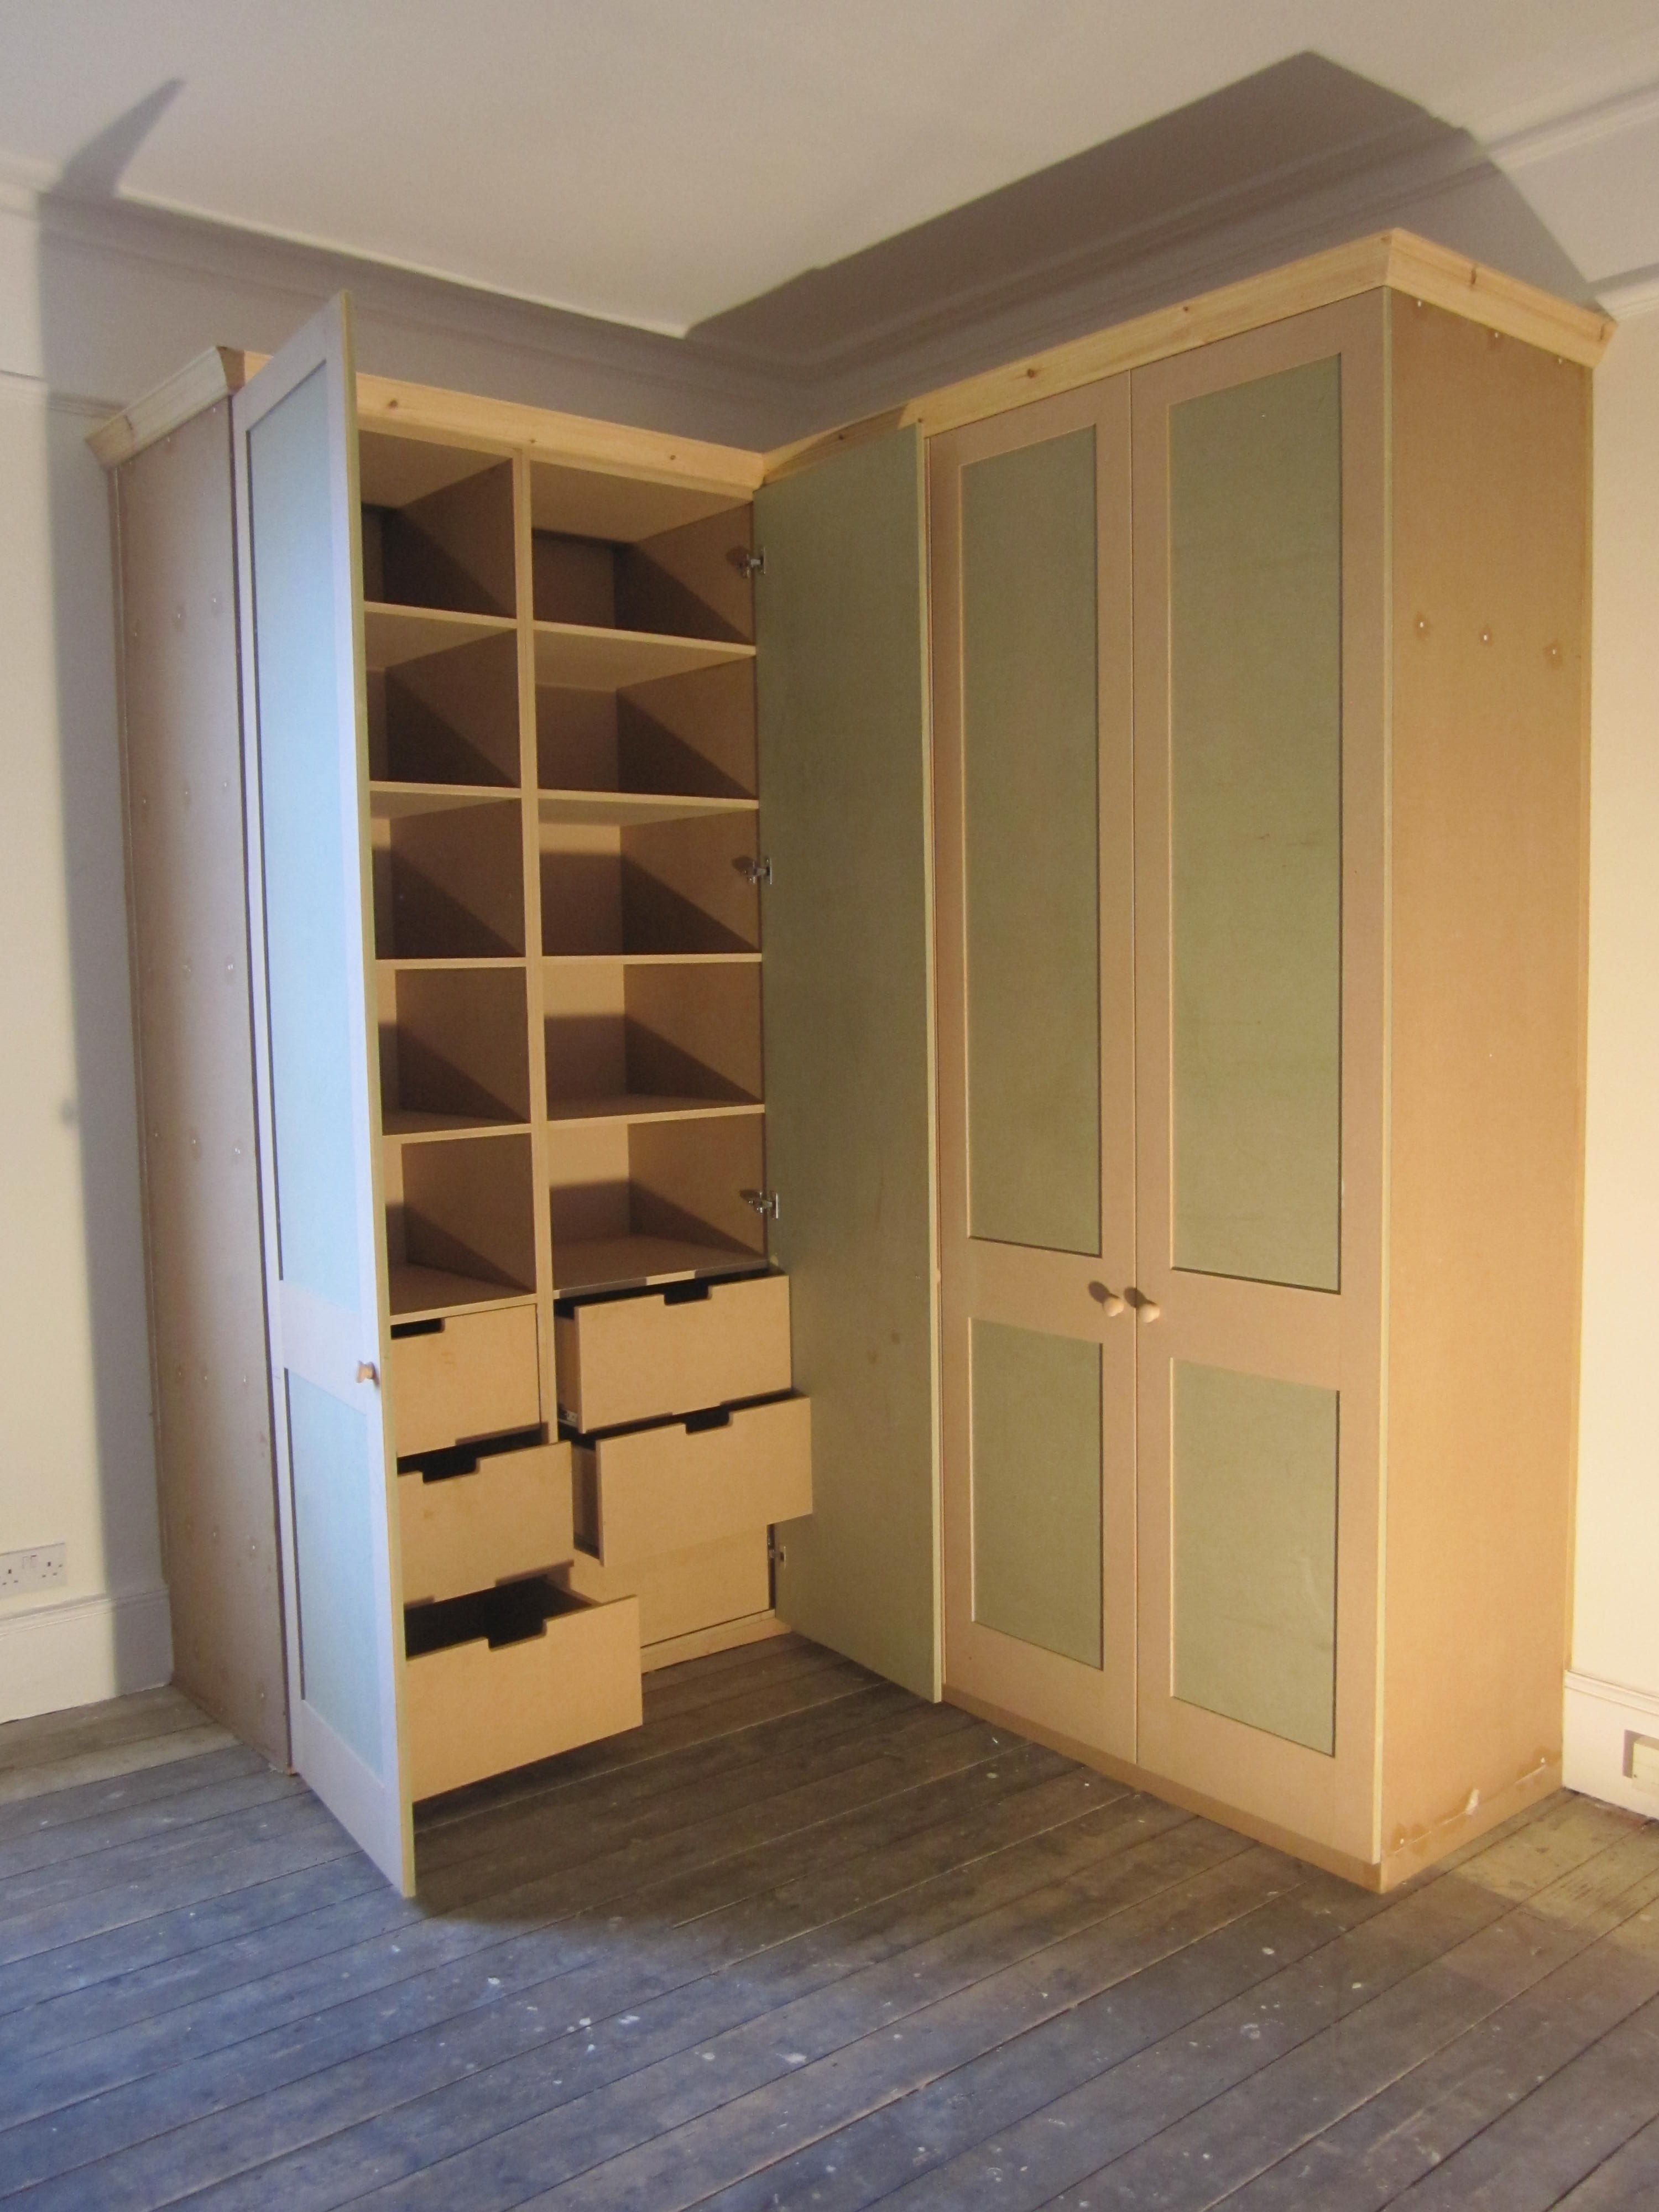 For Idea Of Drawer Shape Only Closets Pinterest Drawers And Throughout Wardrobes With Shelves And Drawers (View 9 of 15)